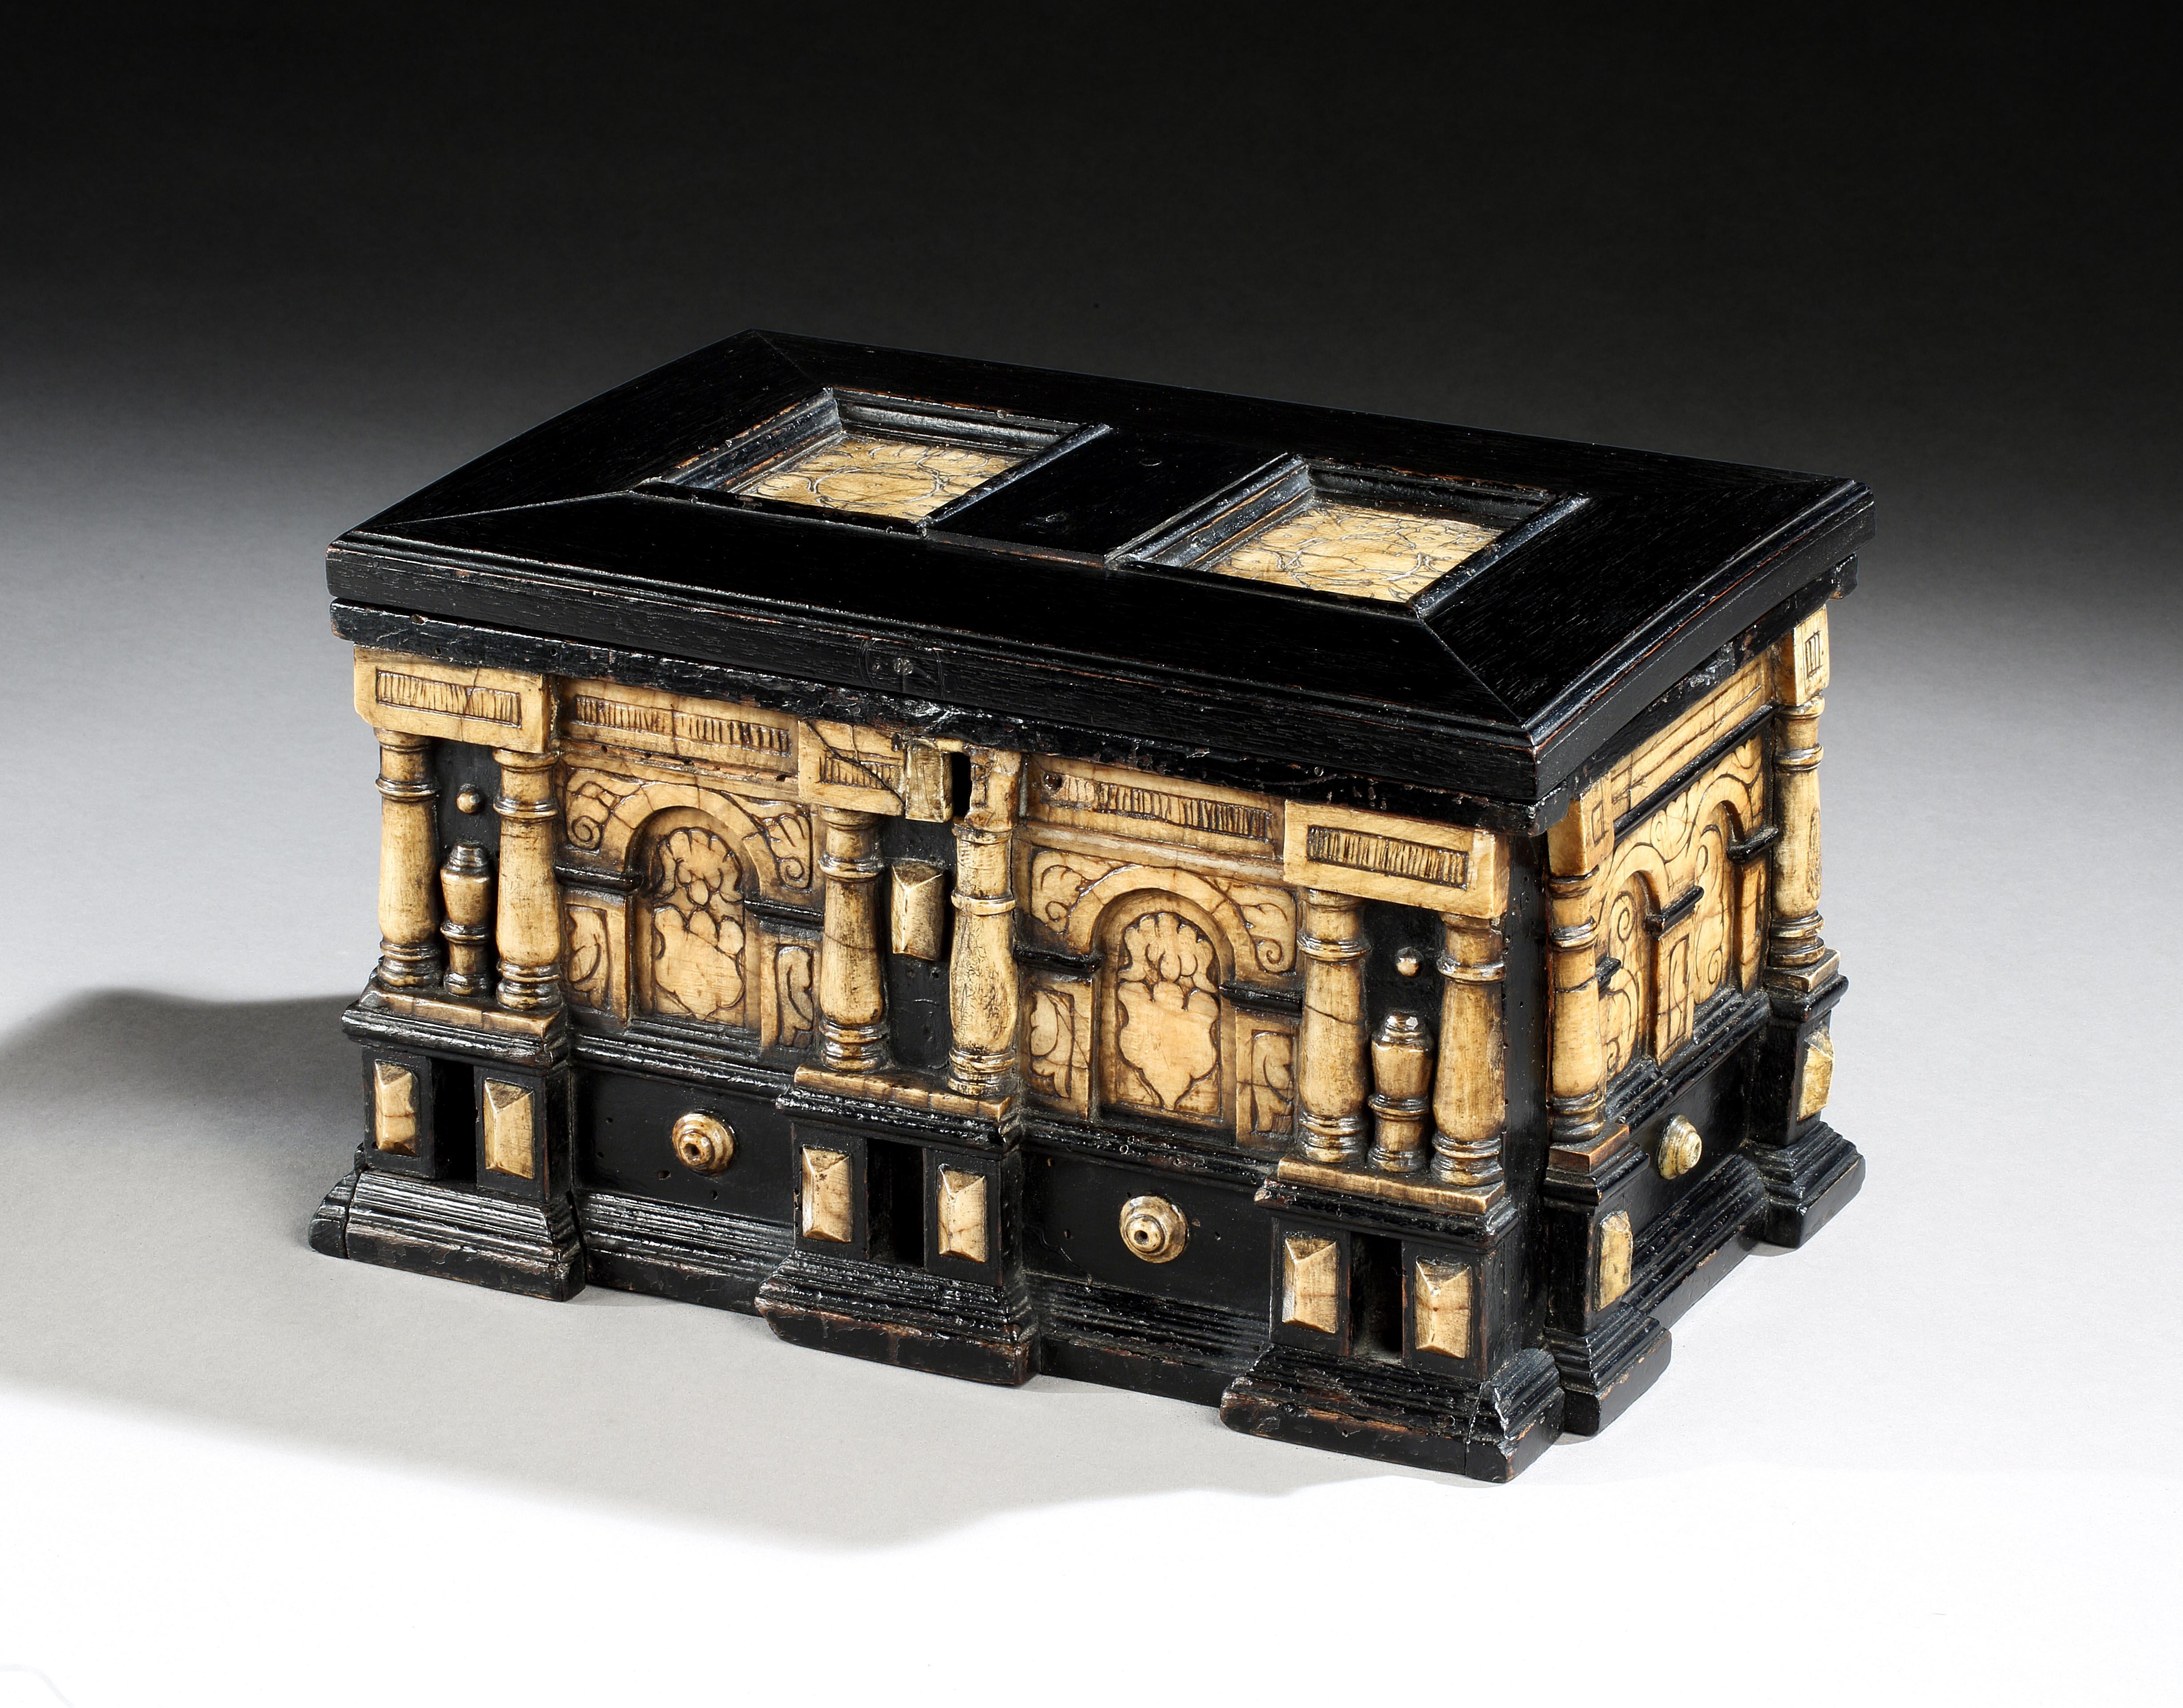 An early 17th century, Flemish, Malines, ebonized and alabaster cabinet with removable sliding sides revealing secret drawers 12” long.

The ebonized top with two carved alabaster panels within ogee mouldings and a mitred frame. The architectural